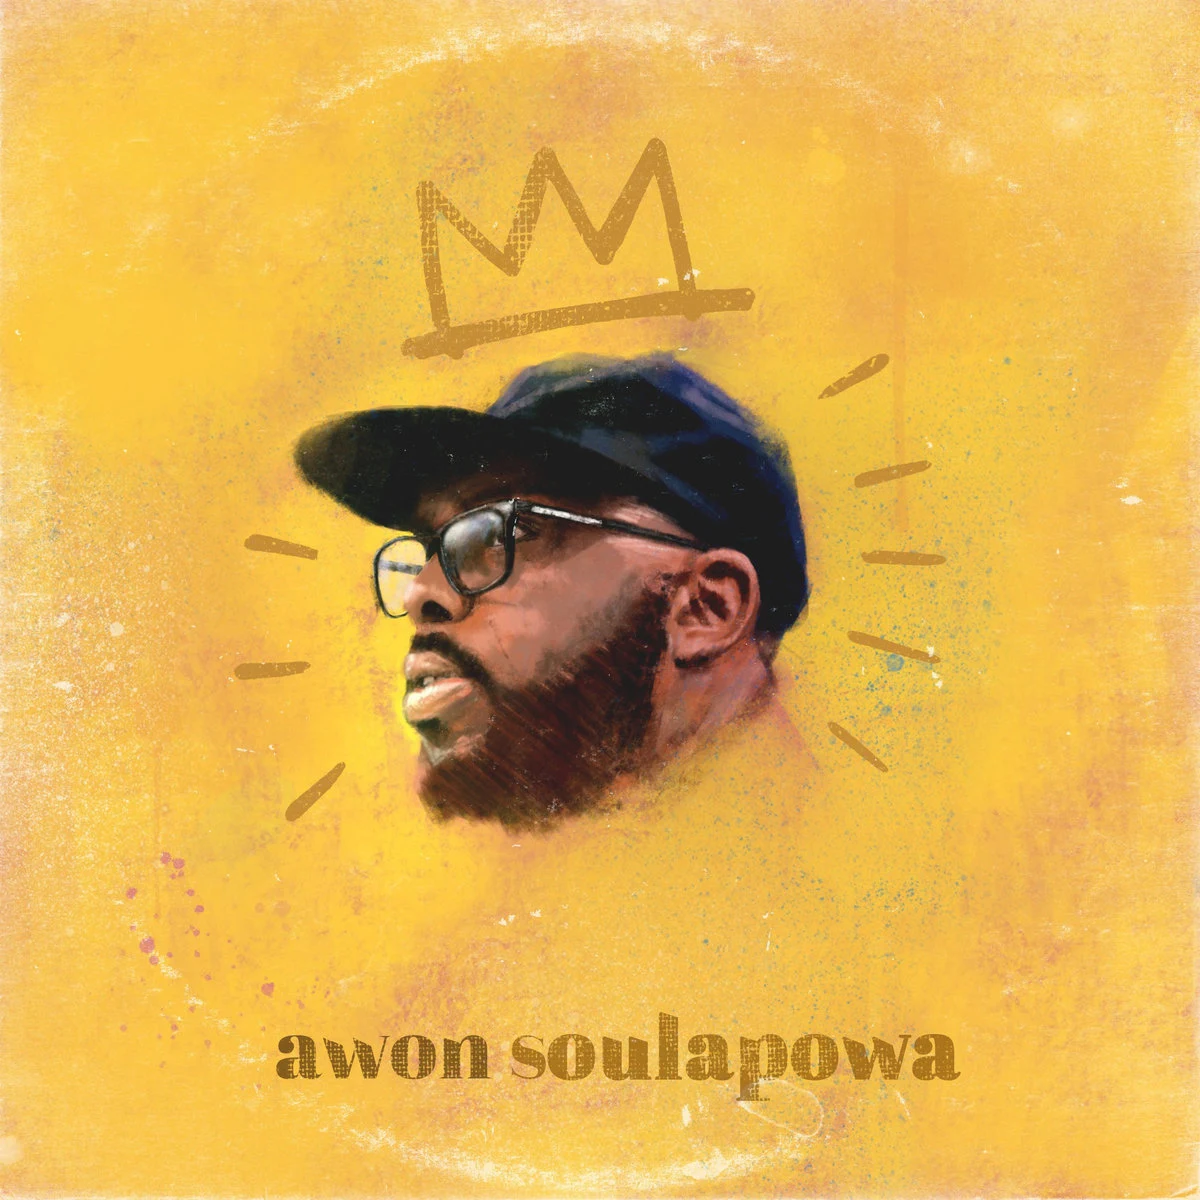 Antwan Wiggins, born March 6, 1980 in Brooklyn, NY, is an American hip hop recording artist based in Newport News, Virginia.[1] He is know by his stage name Awon. In 2014, along with frequent collaborator Phoniks, he founded Don't Sleep Records.[2][3] Awon has shared the stage with many hip-hop acts including Little Brother, Common, EPMD, MC Lyte, and Oddisee.